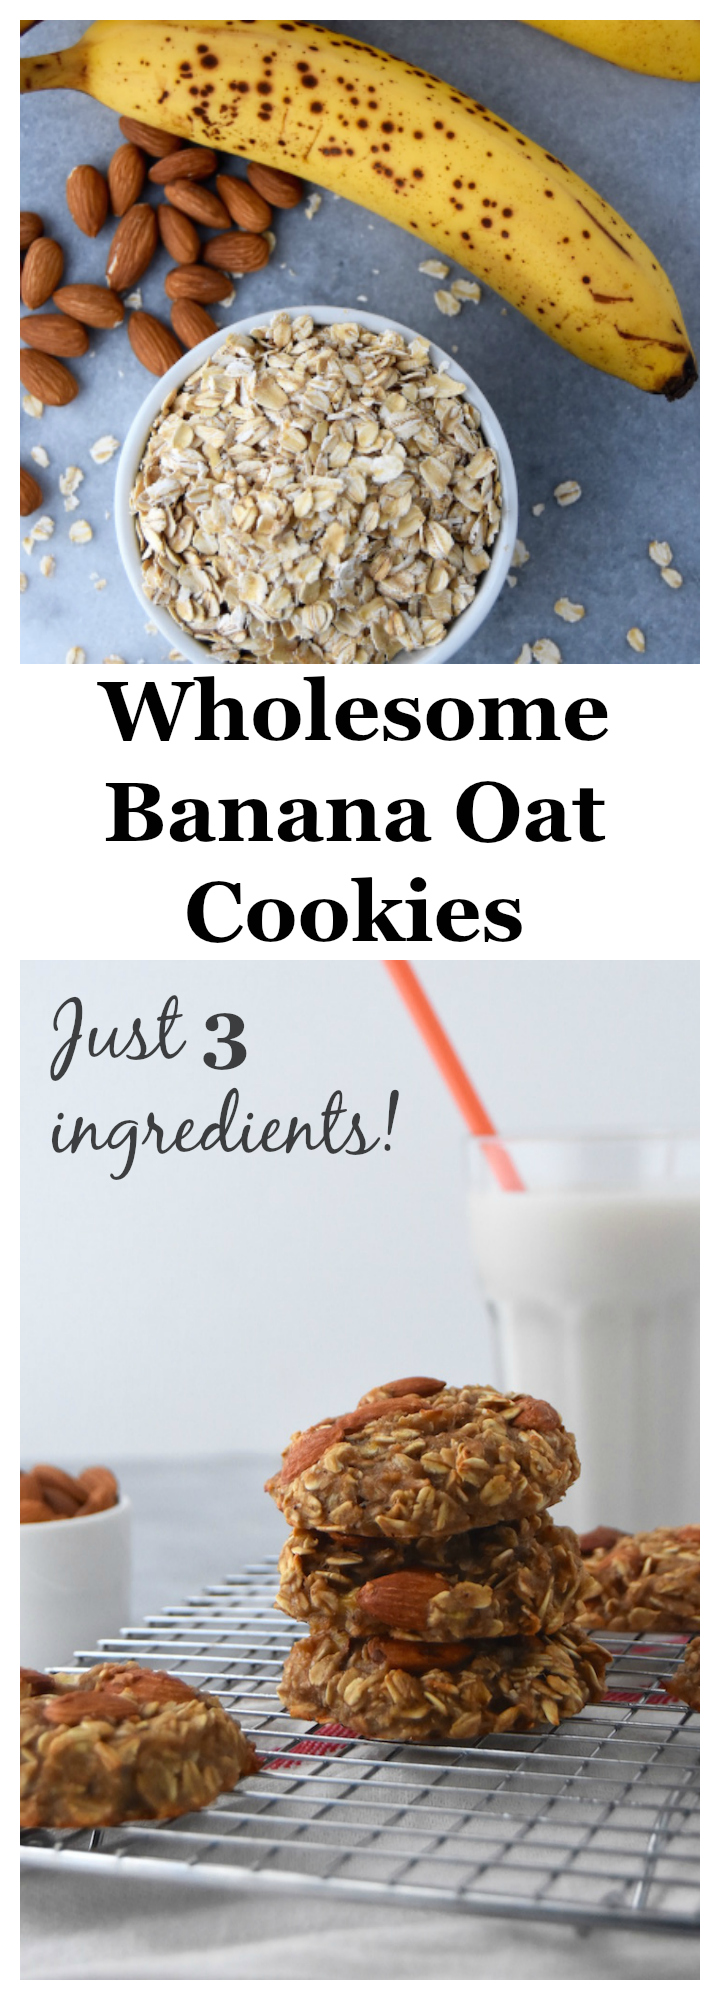 Wholesome Banana Oat Cookies made with just 3 ingredients in 20 minutes. | uprootkitchen.com